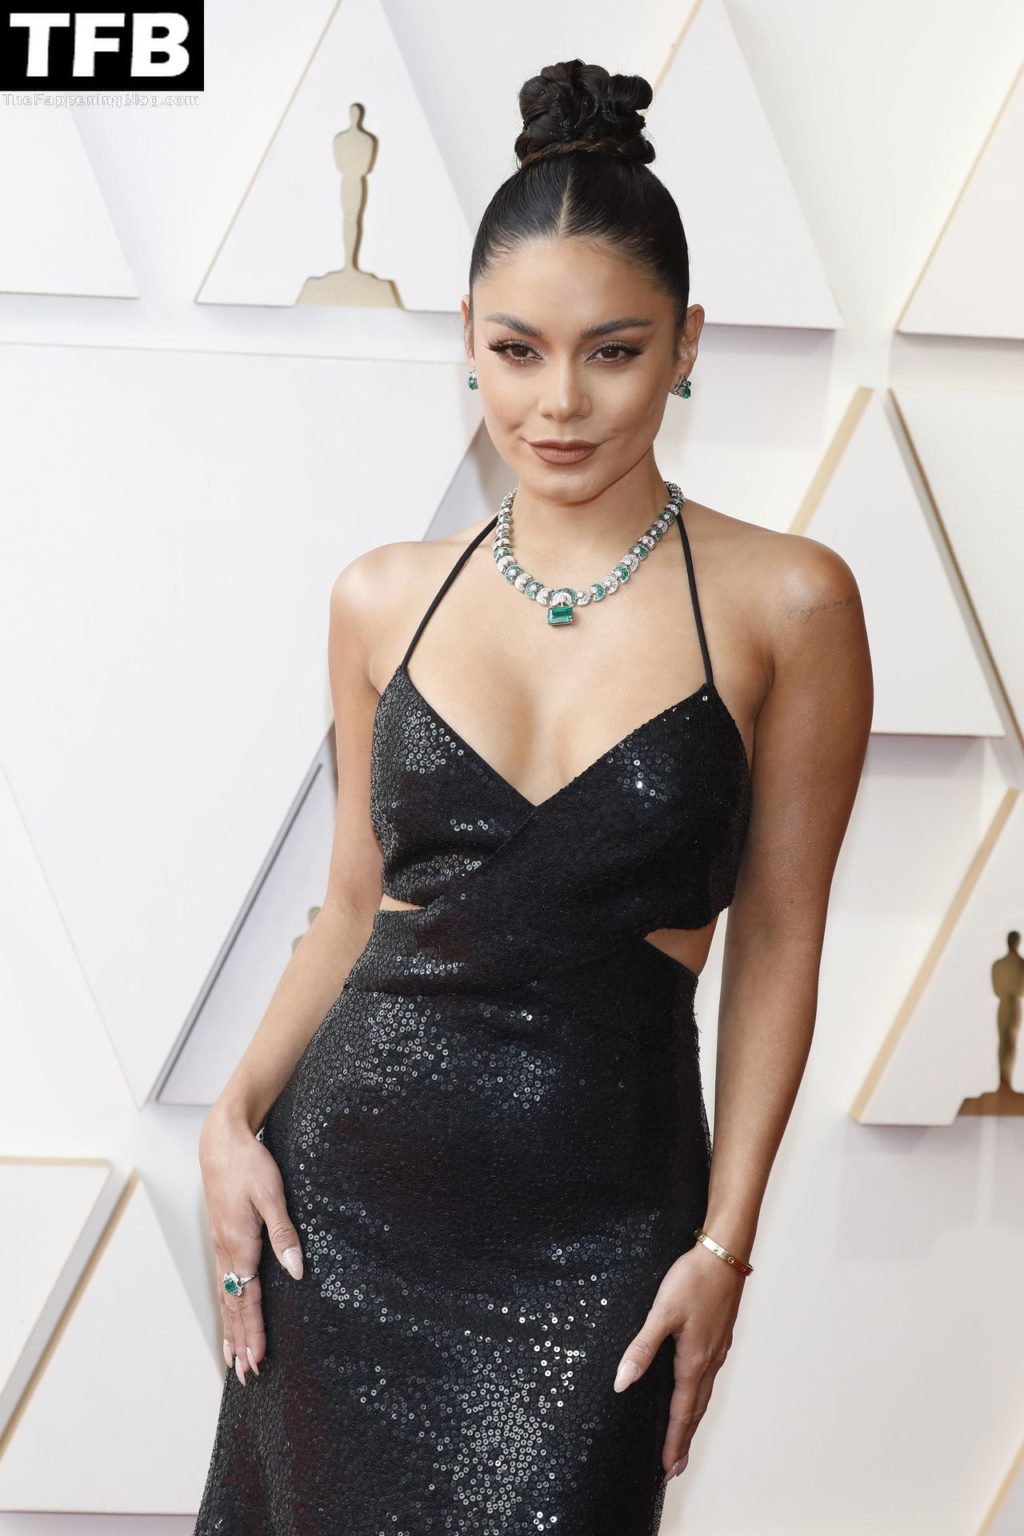 Vanessa Hudgens Sexy The Fappening Blog 68 2 1024x1536 - Vanessa Hudgens Poses on the Red Carpet at the 94th Annual Academy Awards (83 Photos)